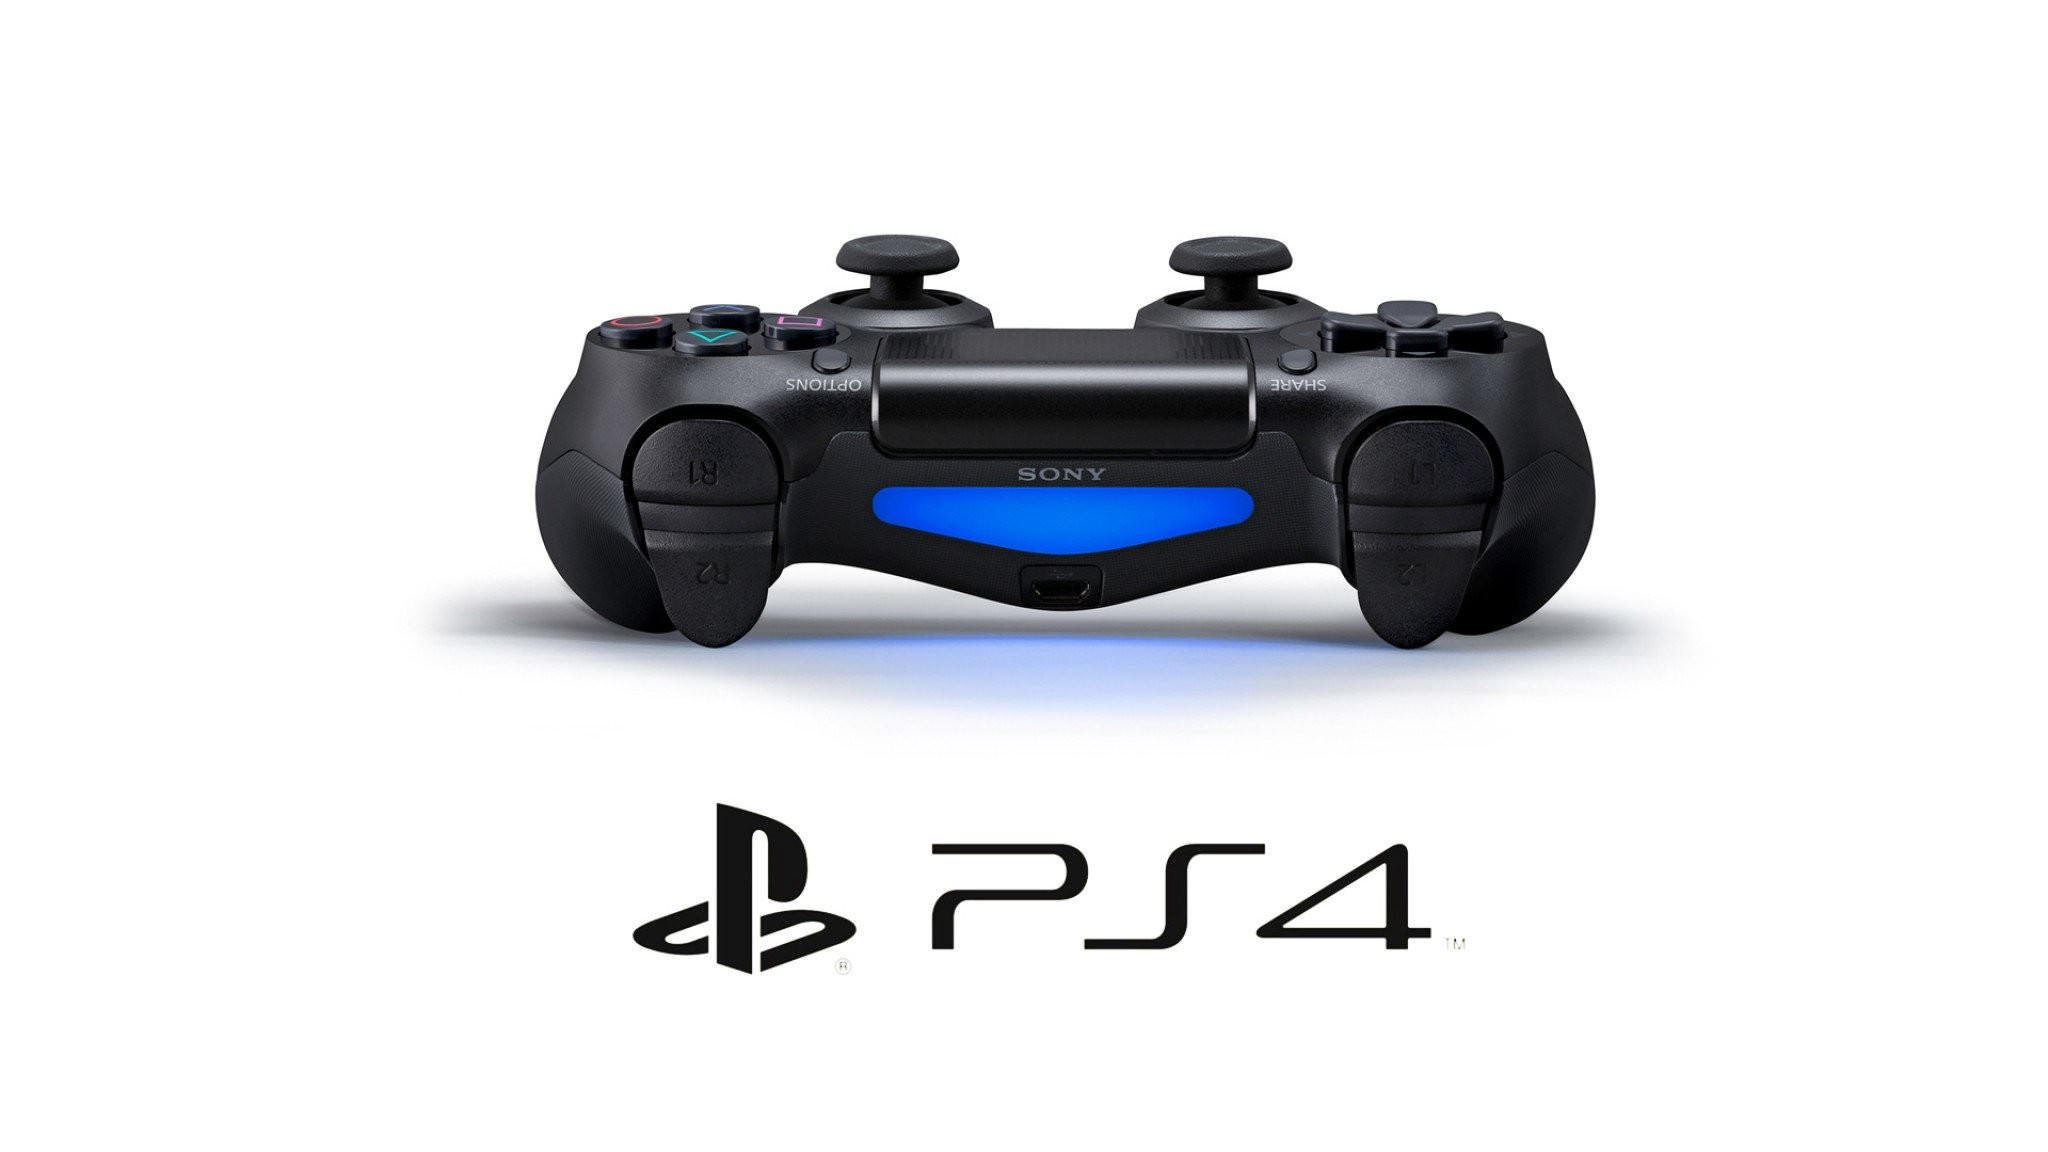 2048x1152 PS4 Playstation videogame system video game sony wallpaper |  |  392528 | WallpaperUP